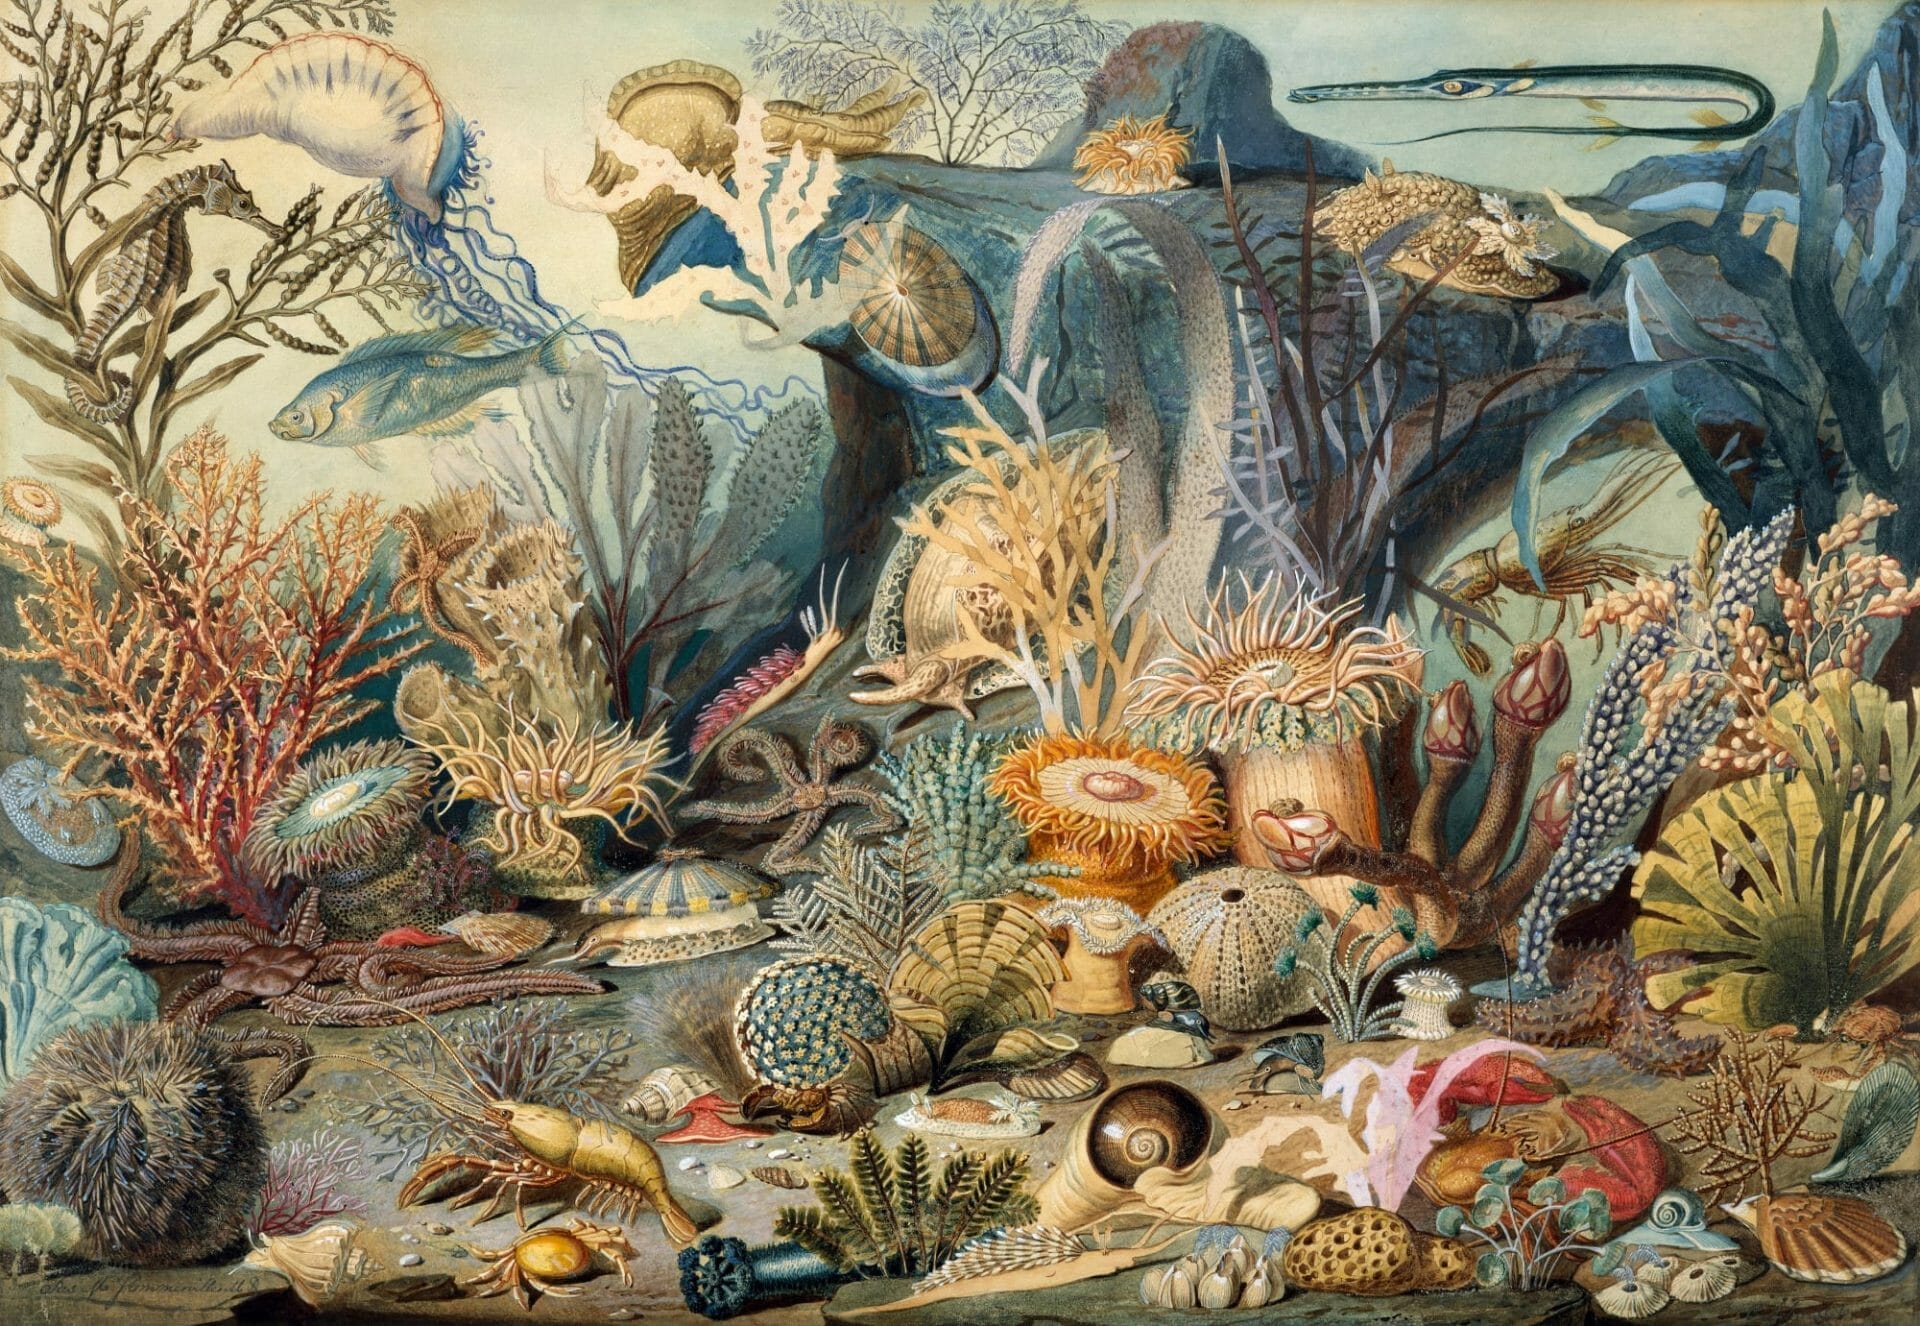 Christian Schussele and James M. Sommerville, Ocean Life, (c.1859), watercolor, gouache, graphite, and gum arabic on off-white wove paper, 48.3 × 69.7 centimeters. Image courtesy of The Metropolitan Museum of Art